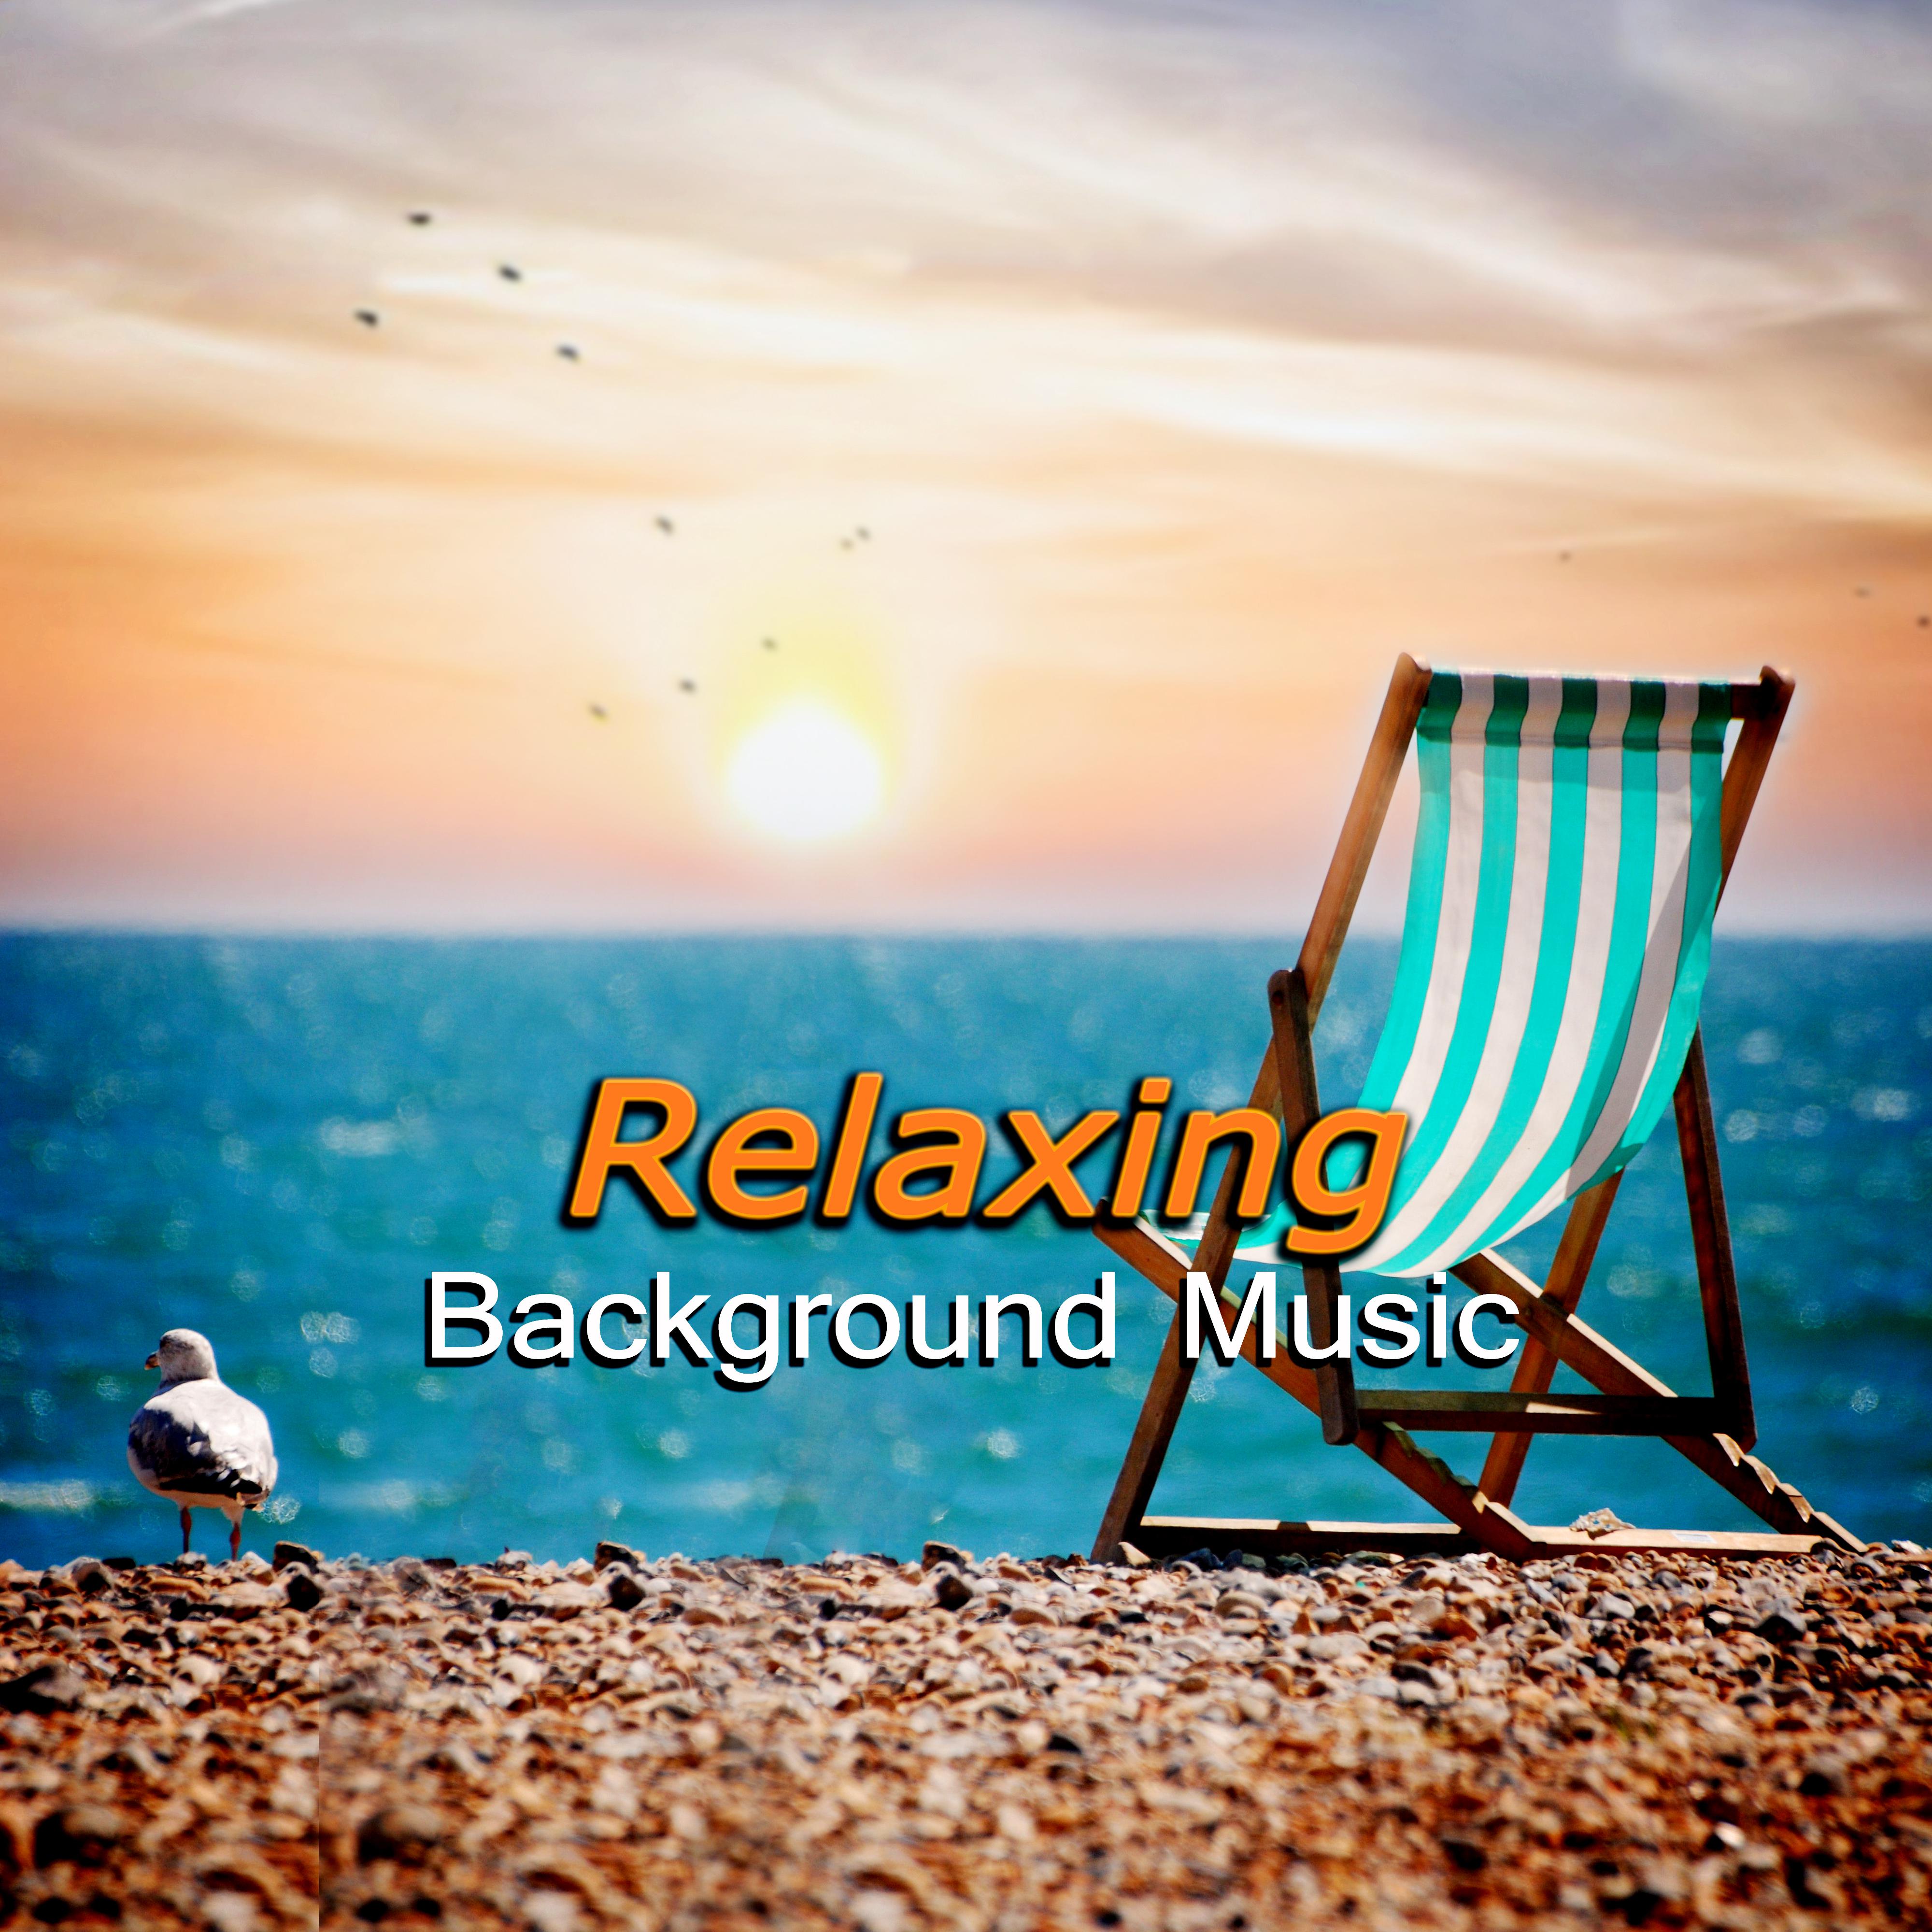 Relaxing Background Music  Soft Sounds for Relaxation  Dinner Party Chill Out Music, Acoustic Guitar Music  Piano Bar Music, Romantic Instrumental Songs, Smooth Jazz